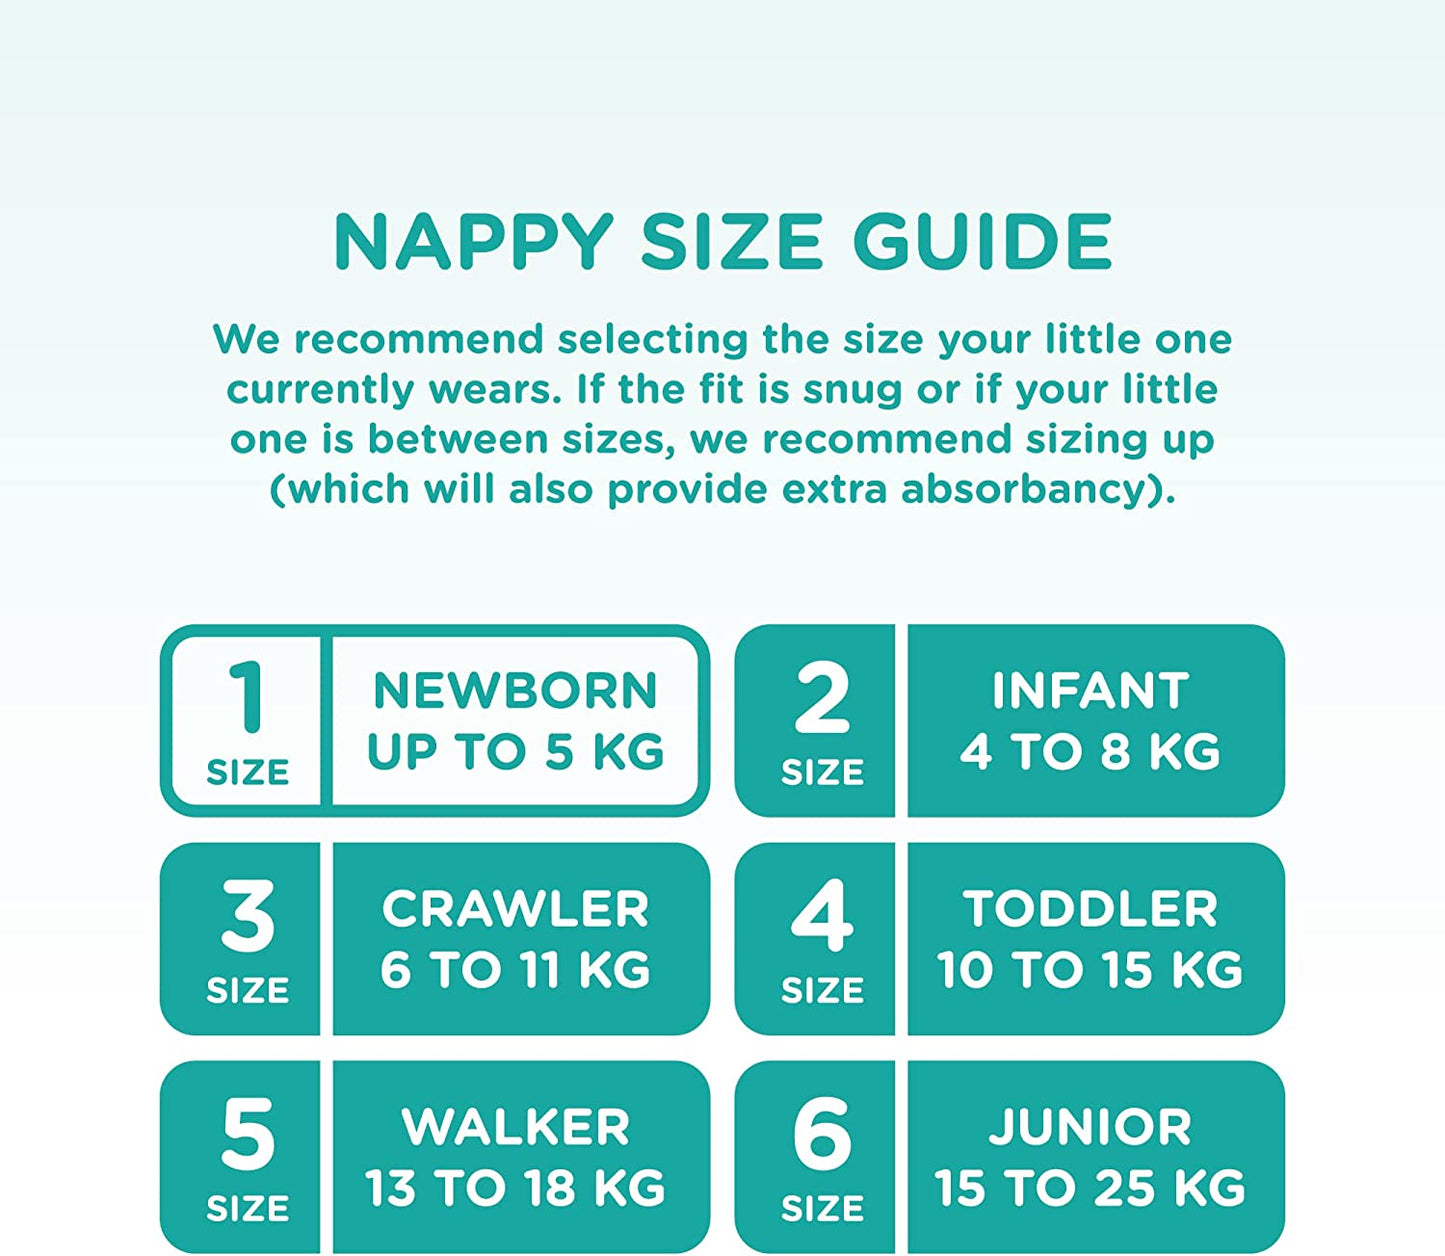 Cuddly Bubs, Size 1 Newborn nappies (up to 5kg), 224 nappies